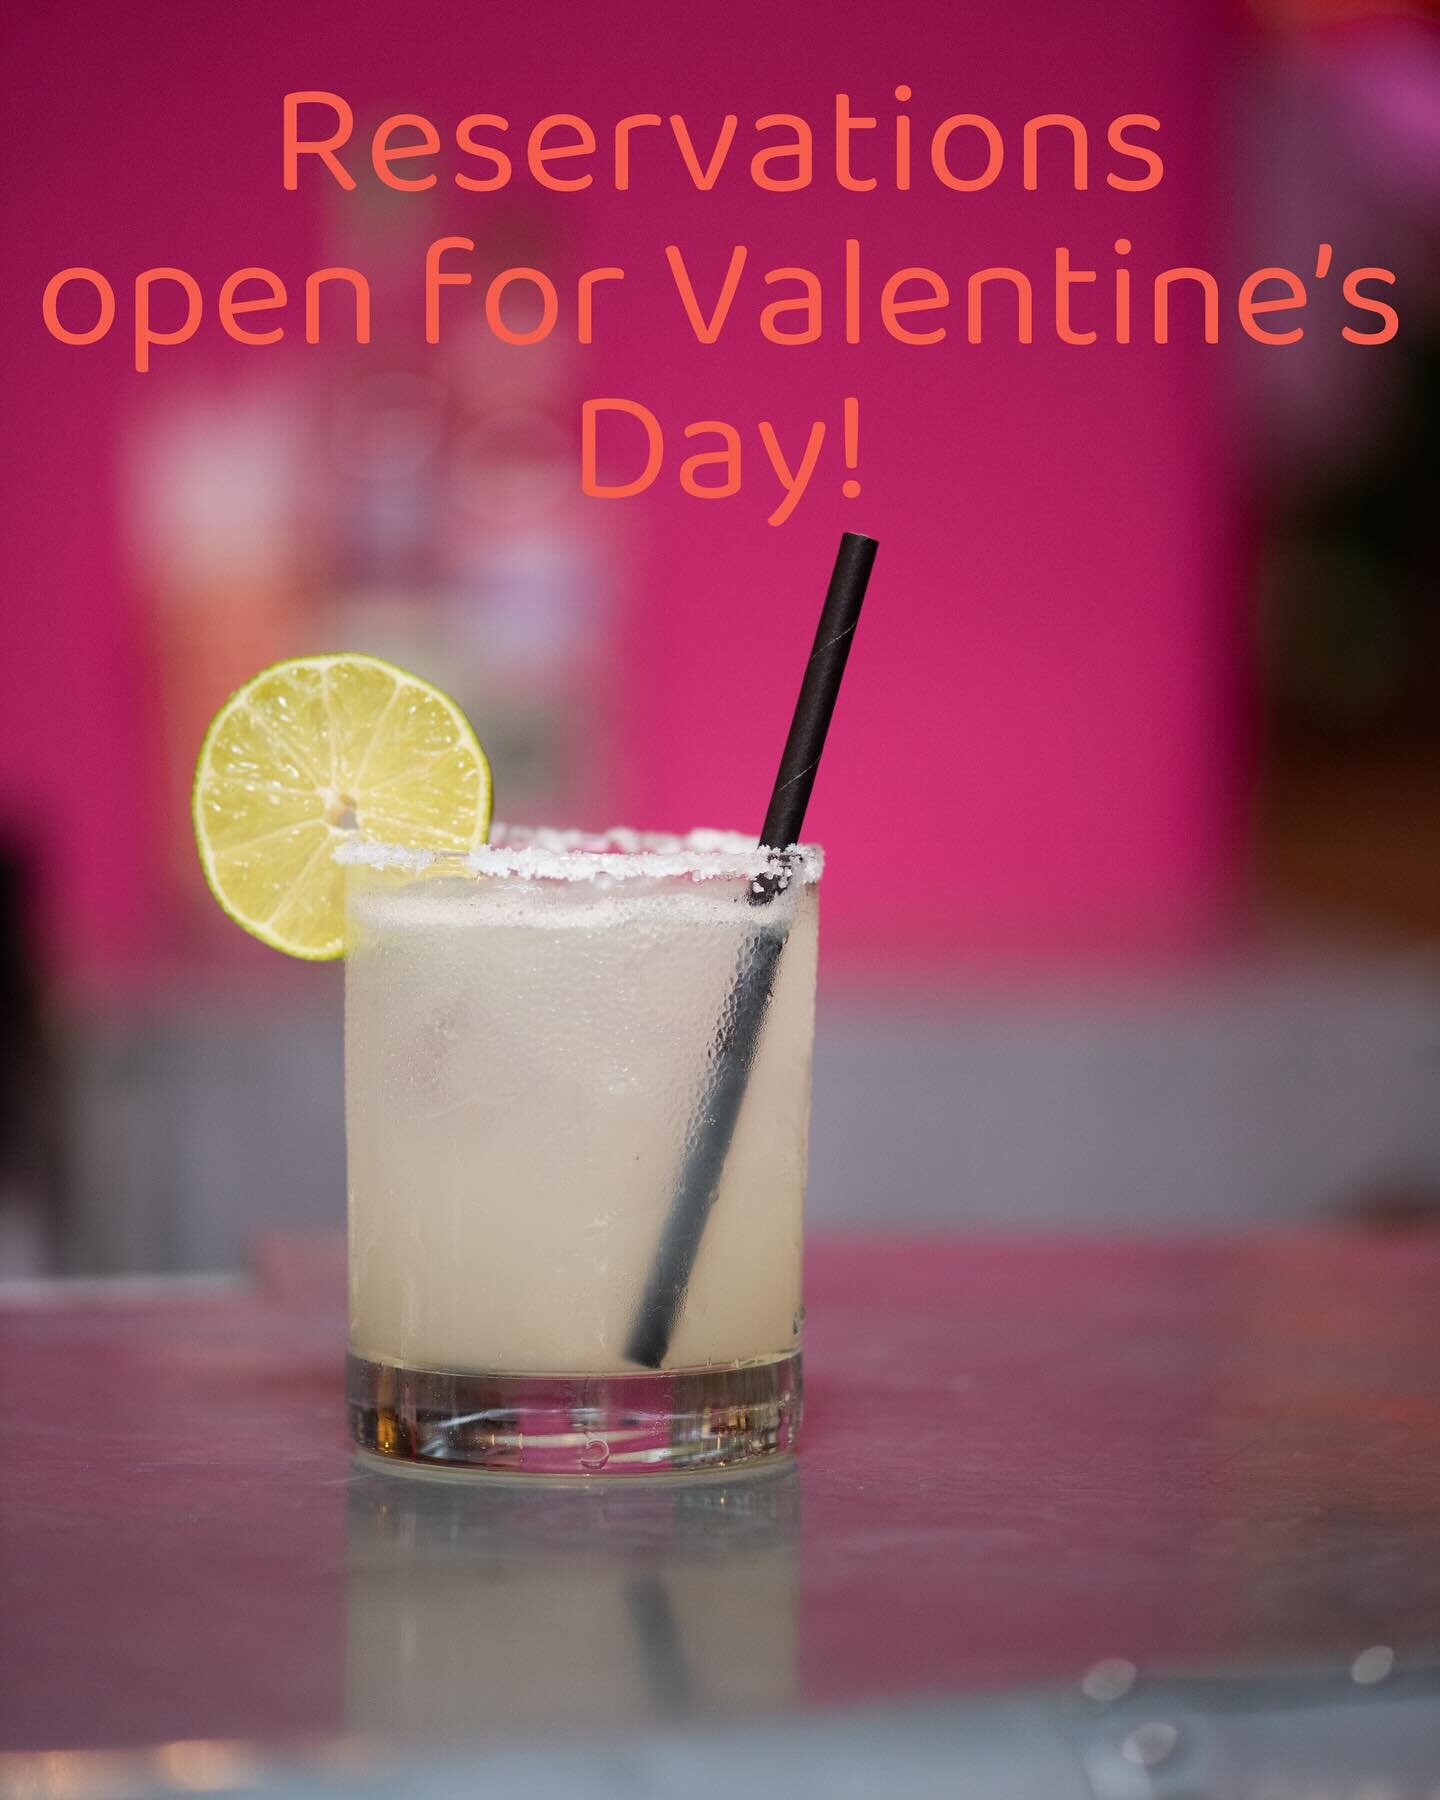 Come join us on February 14 for Valentine&rsquo;s Day on our mezzanine decorated with lots of love! We will have a cocktail and appetizer special just for this day!  We will also take reservations for for two (or more)!!
#valentinedecor #valentines #